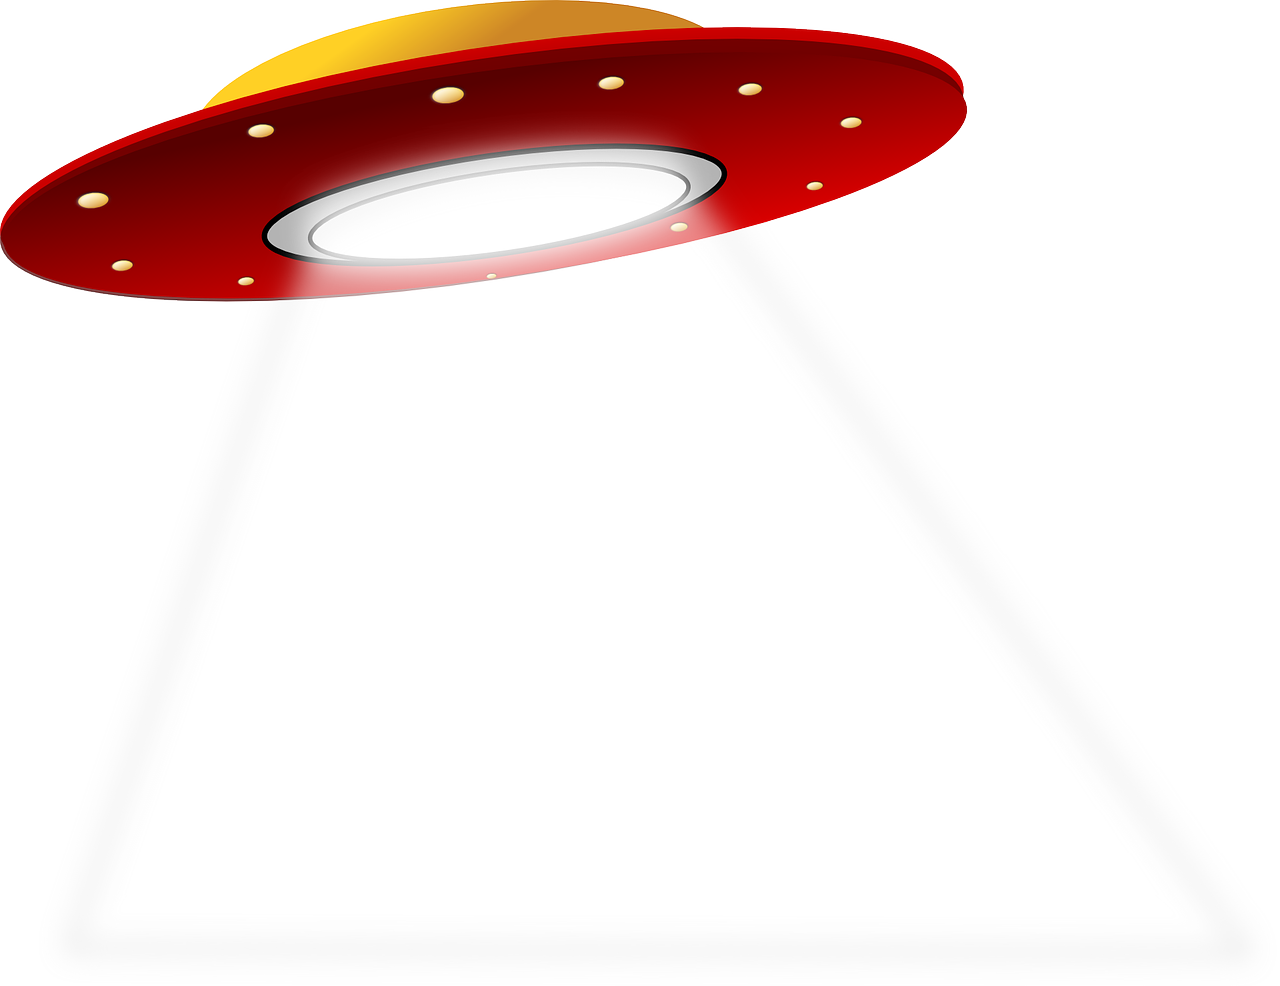 ufo flying saucer flying disc free photo